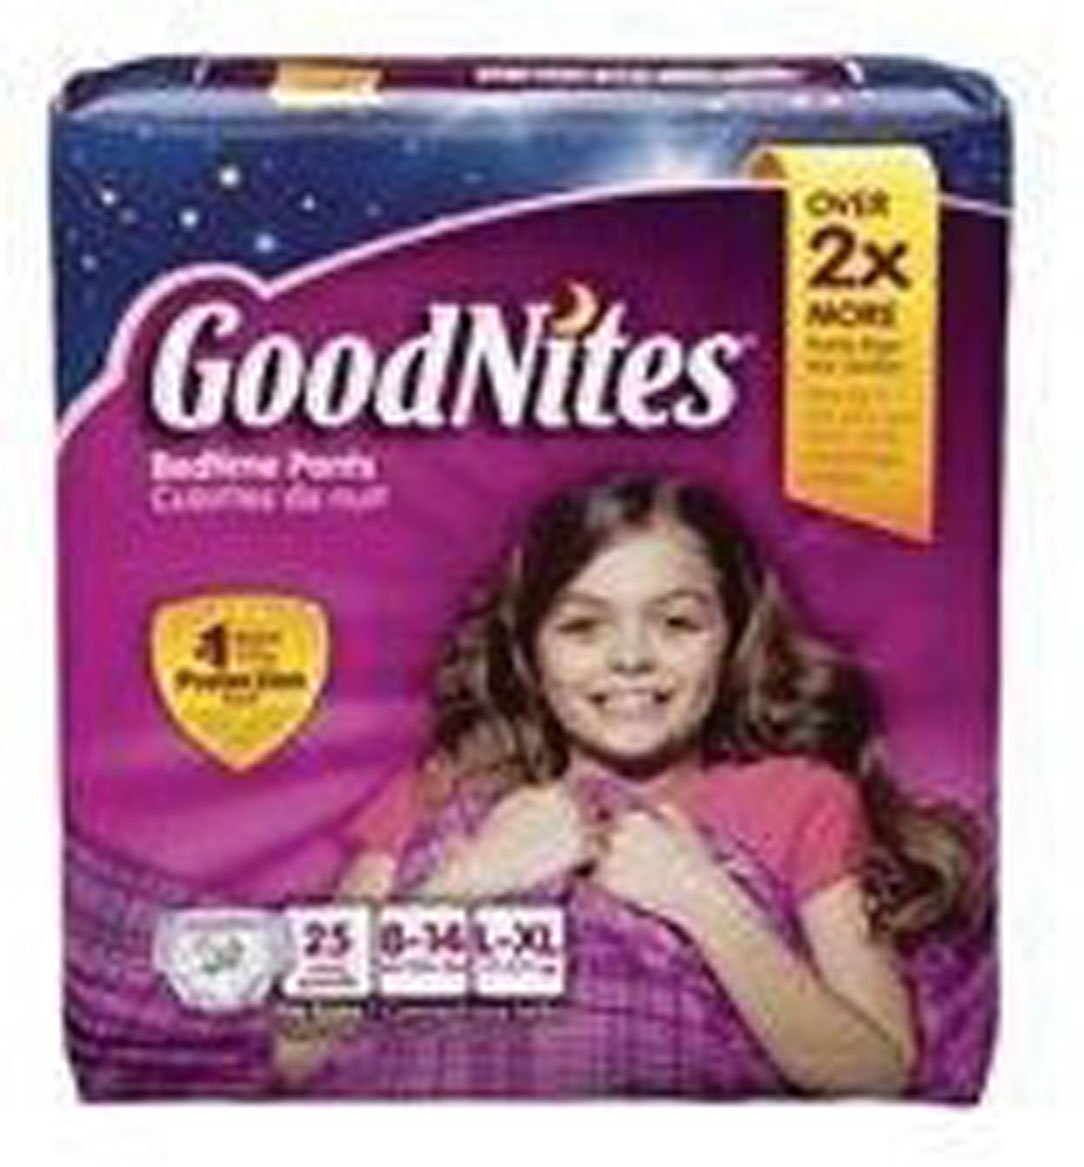 GoodNites Absorbent Pull On Disposable Youth Absorbent Underwear